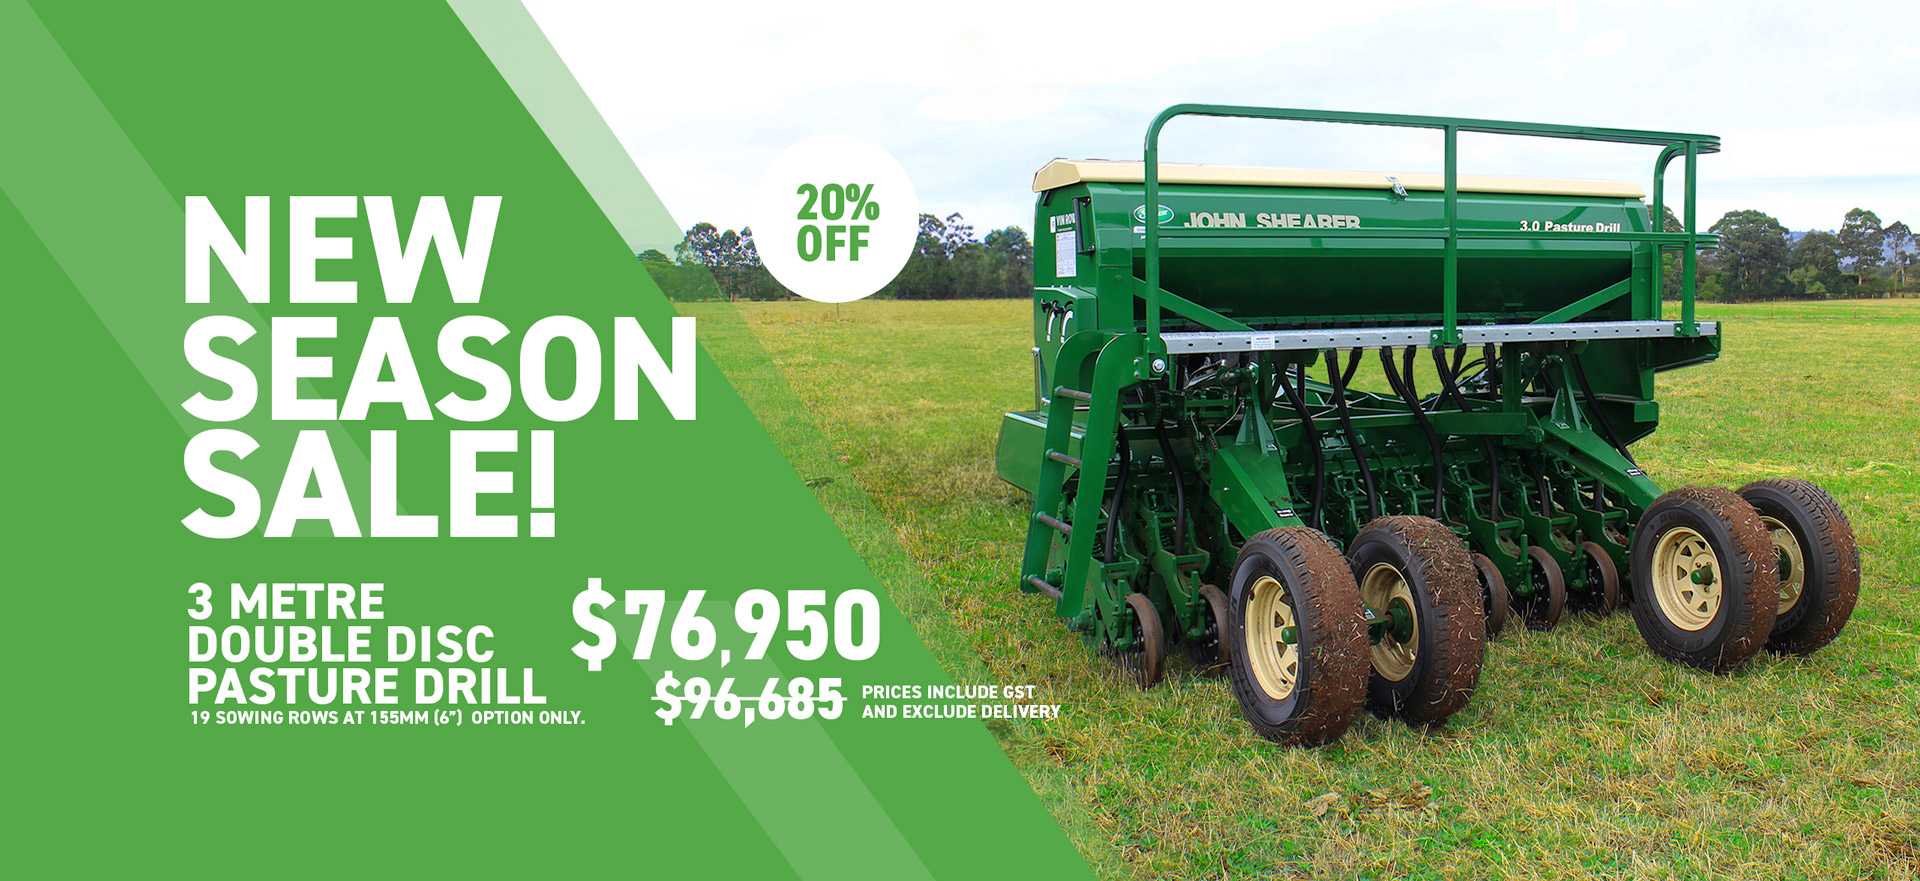 New Season Sale, 20% off in 3 Meter Double disc pasture drill